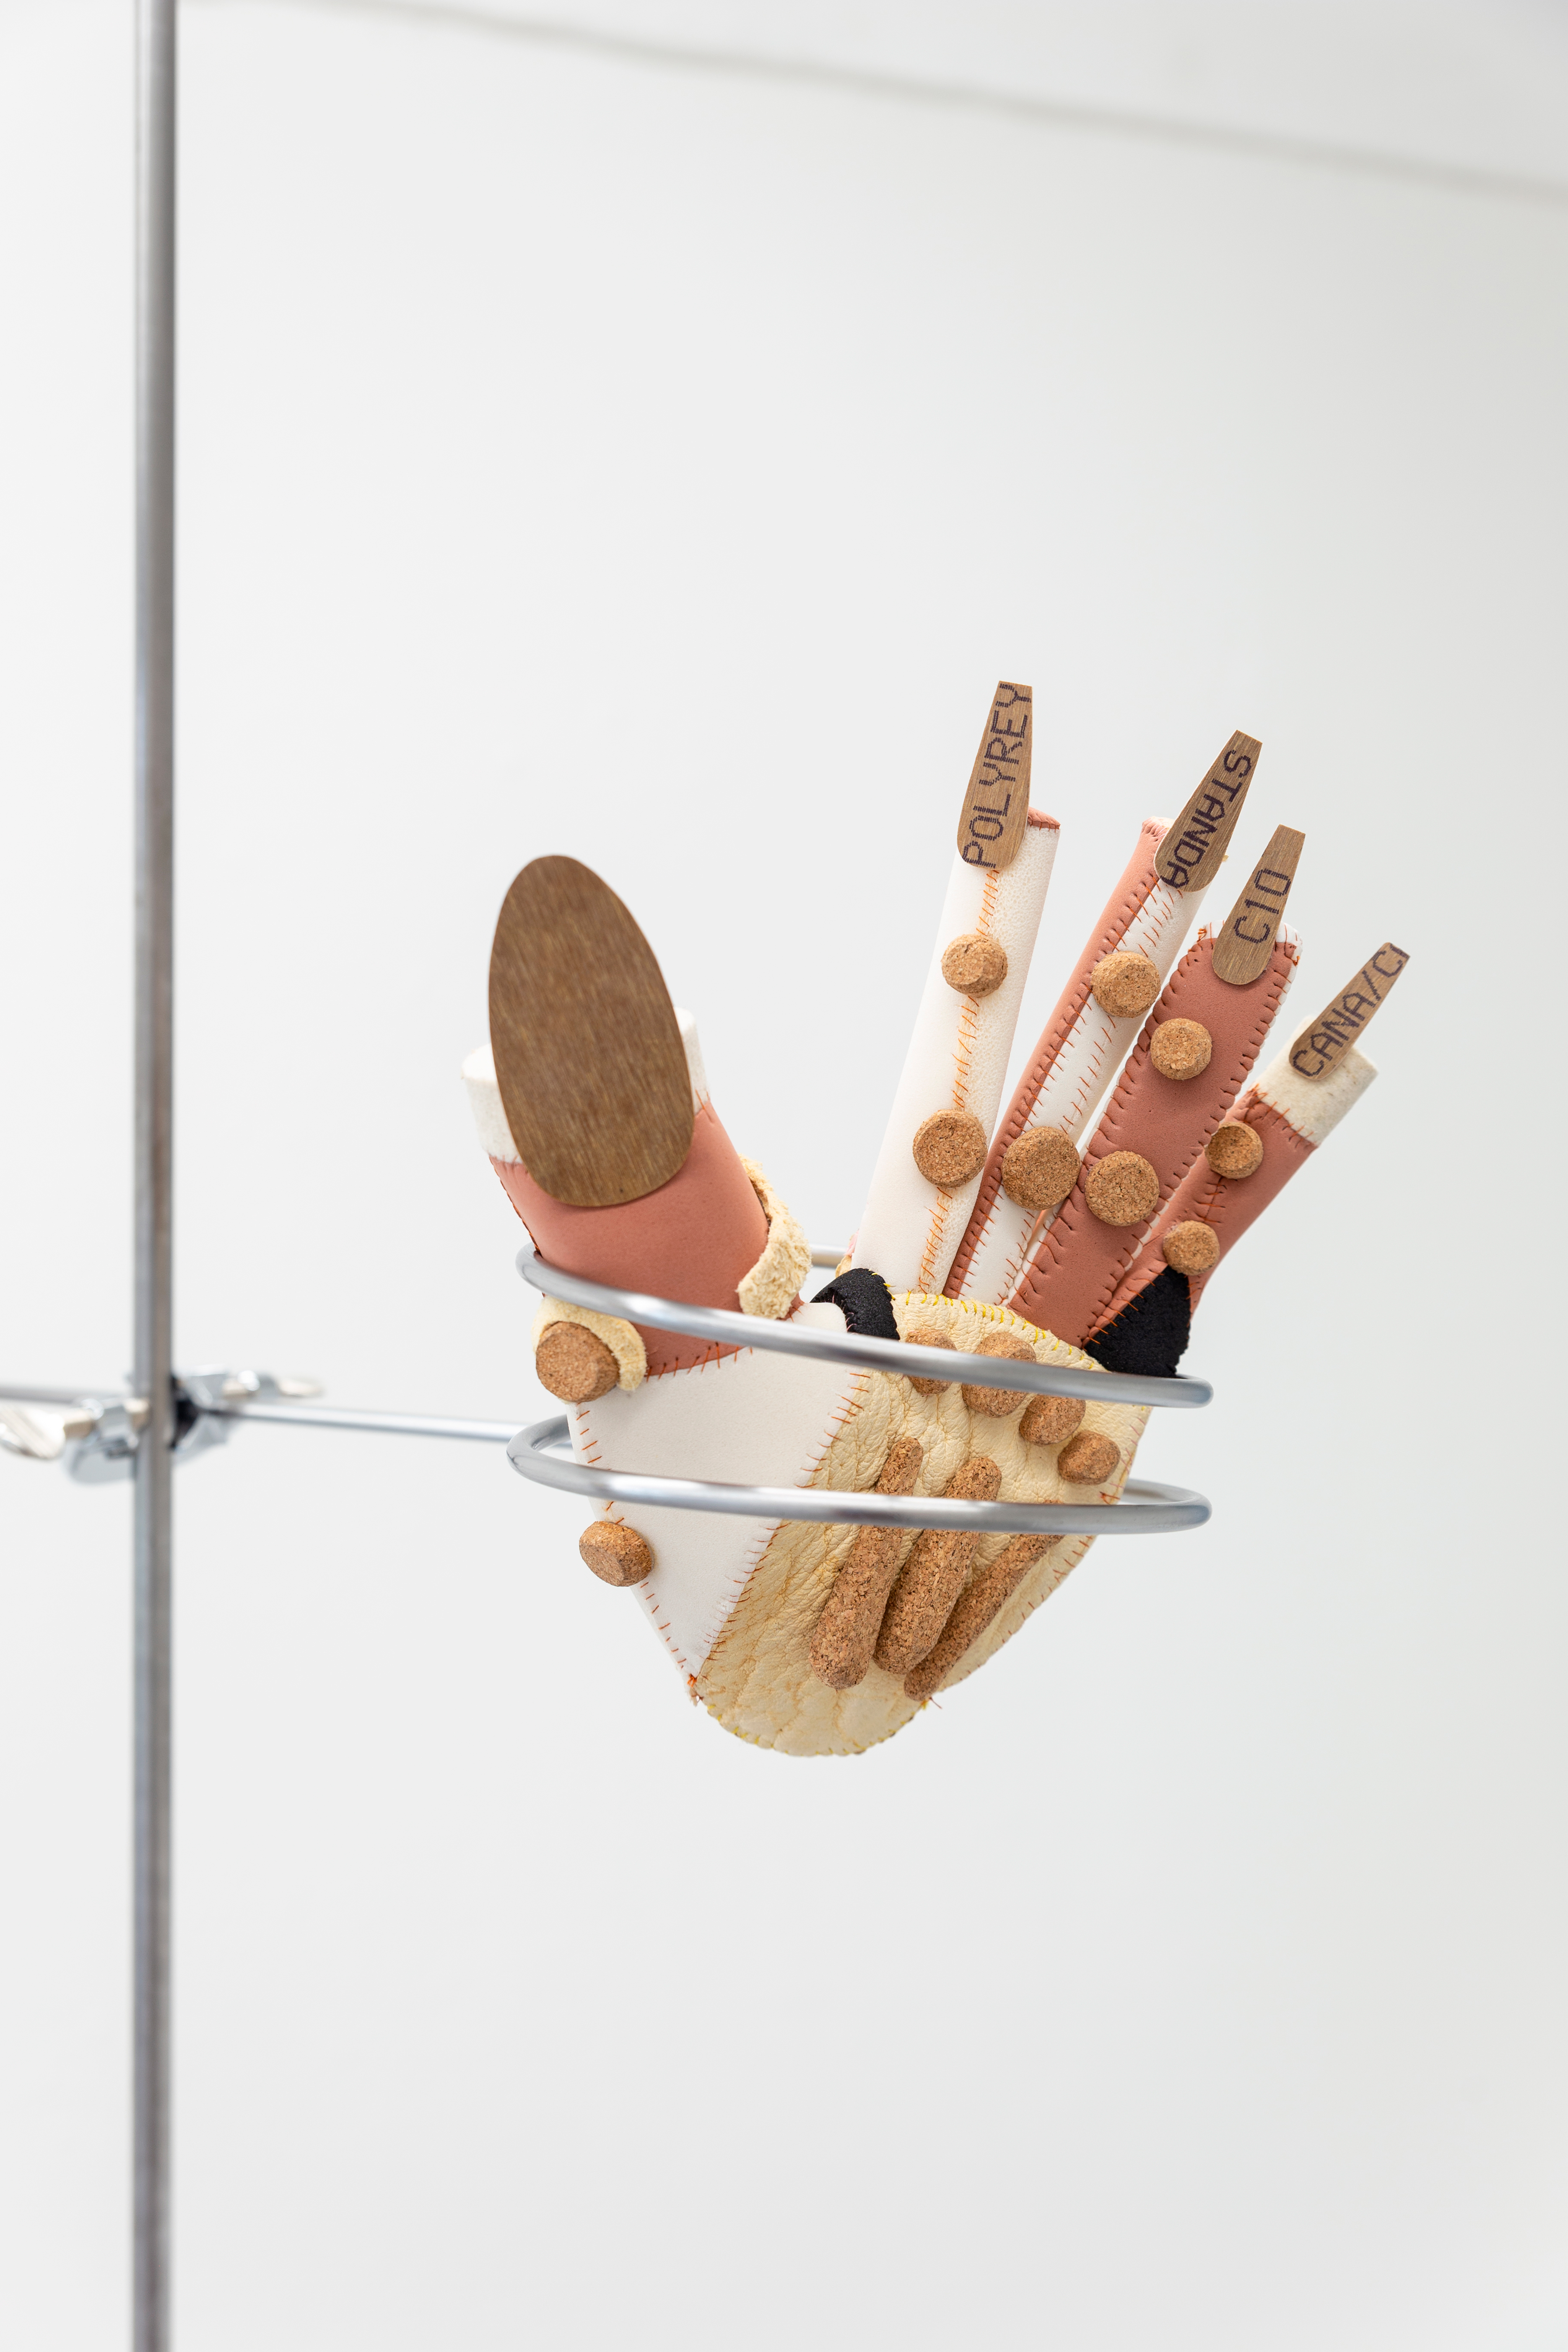 Photo of an art installation called Hands (and Other Products of Labor) by Klára Čermáková (Diploma Projects 2020, UMPRUM — Academy of Arts, Architecture & Design in Prague, Czechia) [view on first half / Detail no. 1]. A detailed look at the sculpture of the hand.